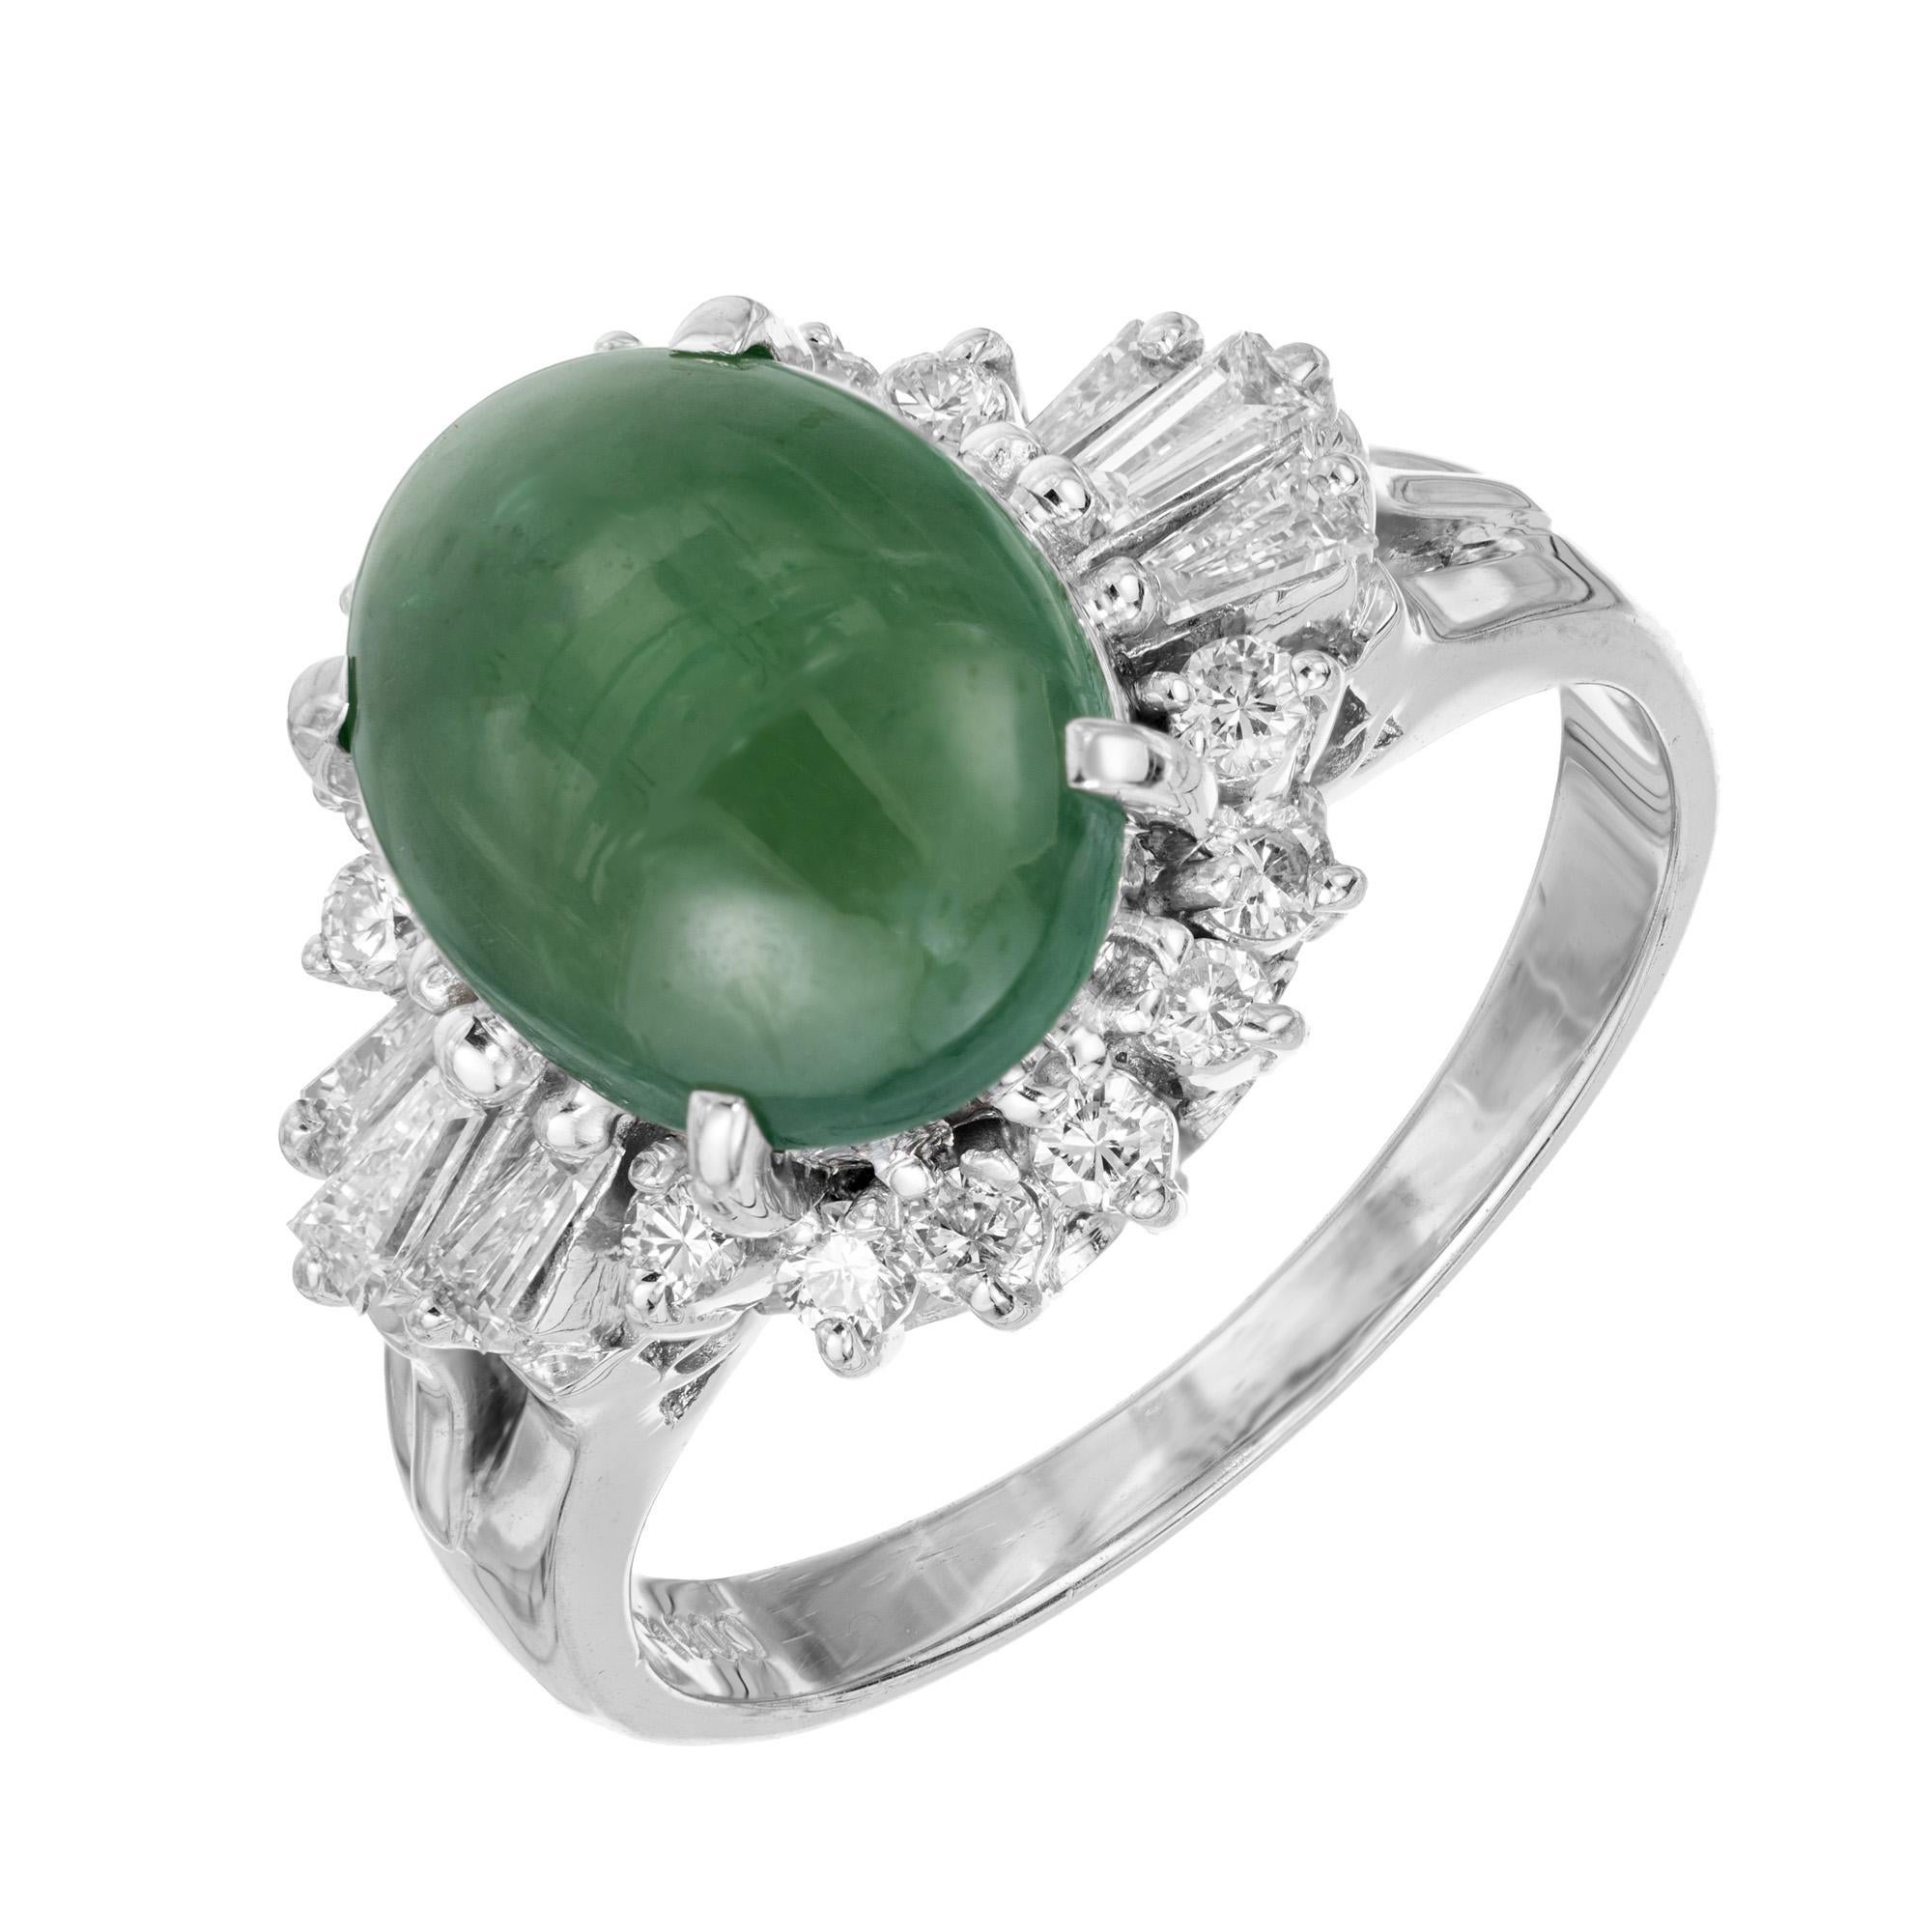 Ompchacite Jade and diamond halo ring. Oval cabochon green omphacite jade center stone with a halo of 14 round cut diamonds accented with 3 tapered baguettes on each side in a platinum setting. GIA Certified green translucent omphacite jade as